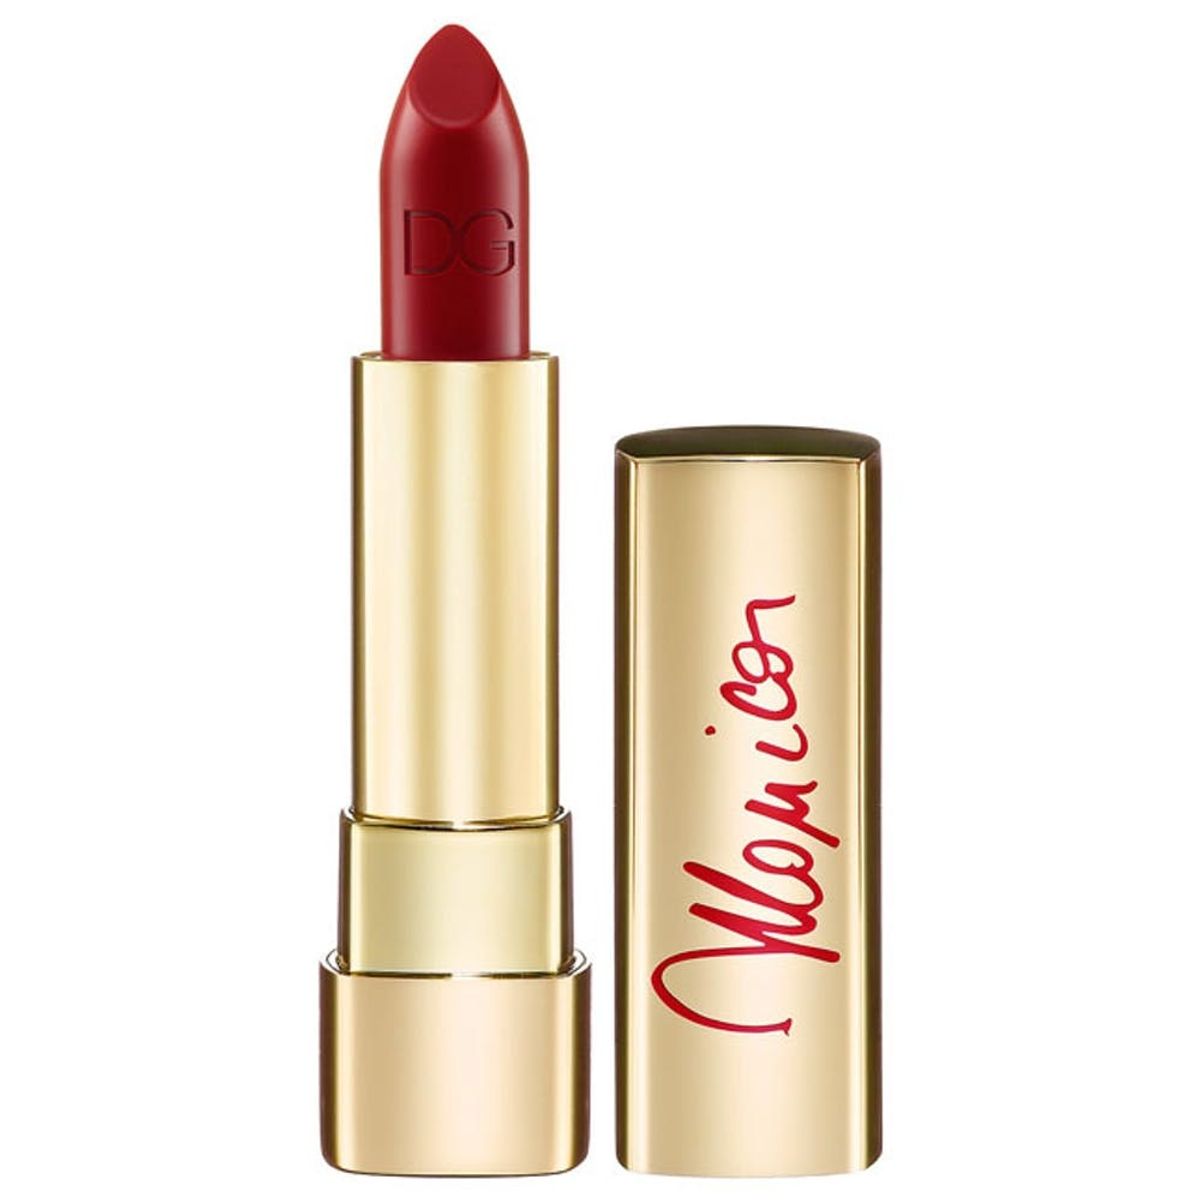 The Best Red Lipsticks for Every Skin Tone